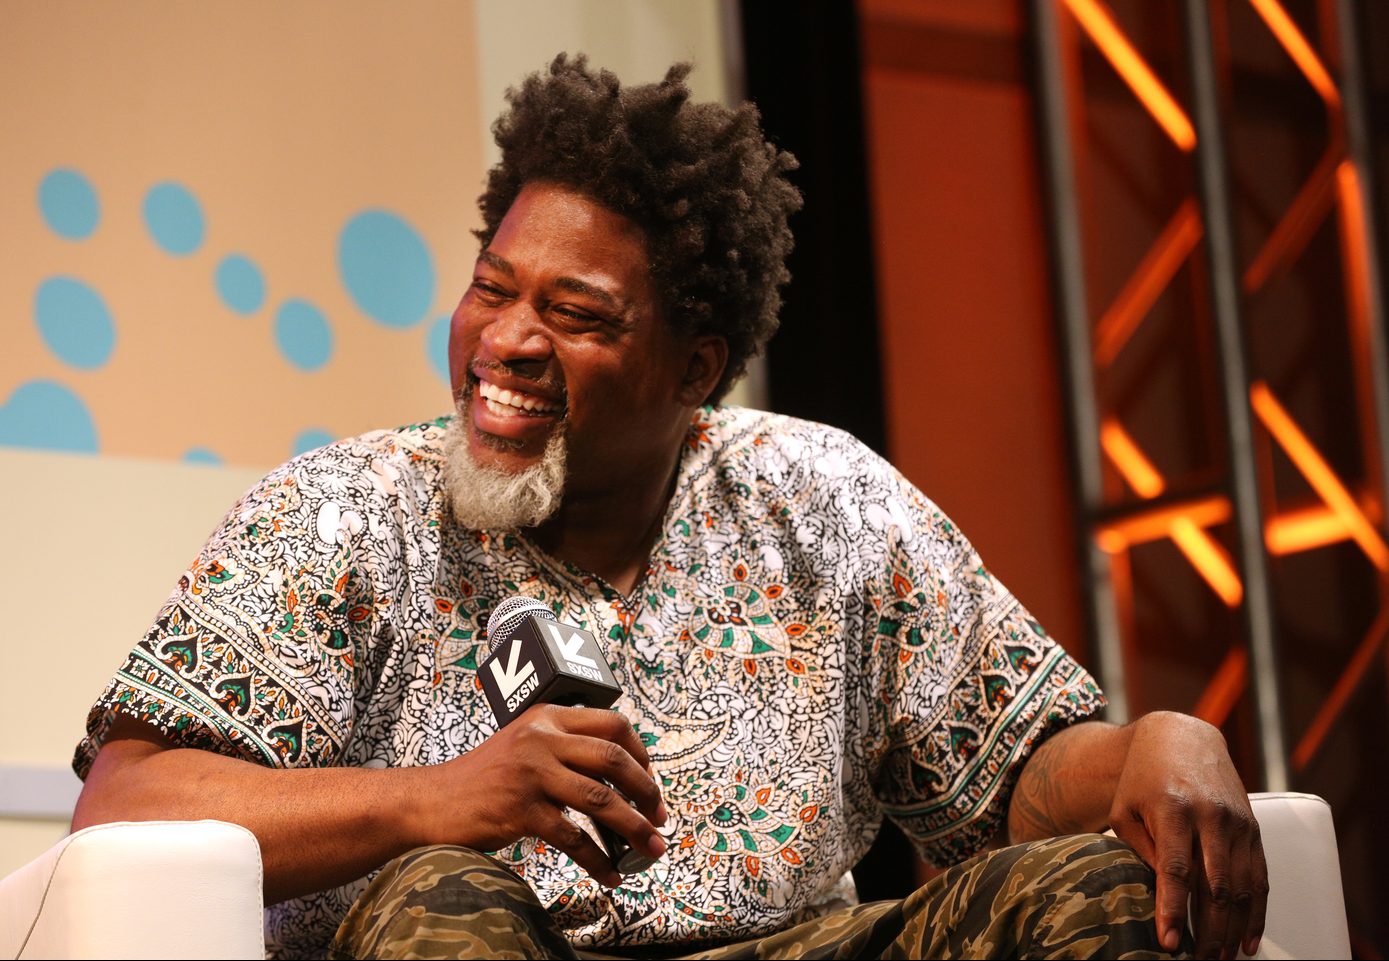 David Banner was part of the “If The Artists Only Knew w/ KP the Great & David Banner” featured session, part of the Music Culture & Stories track. Photo by Jay Nicholas